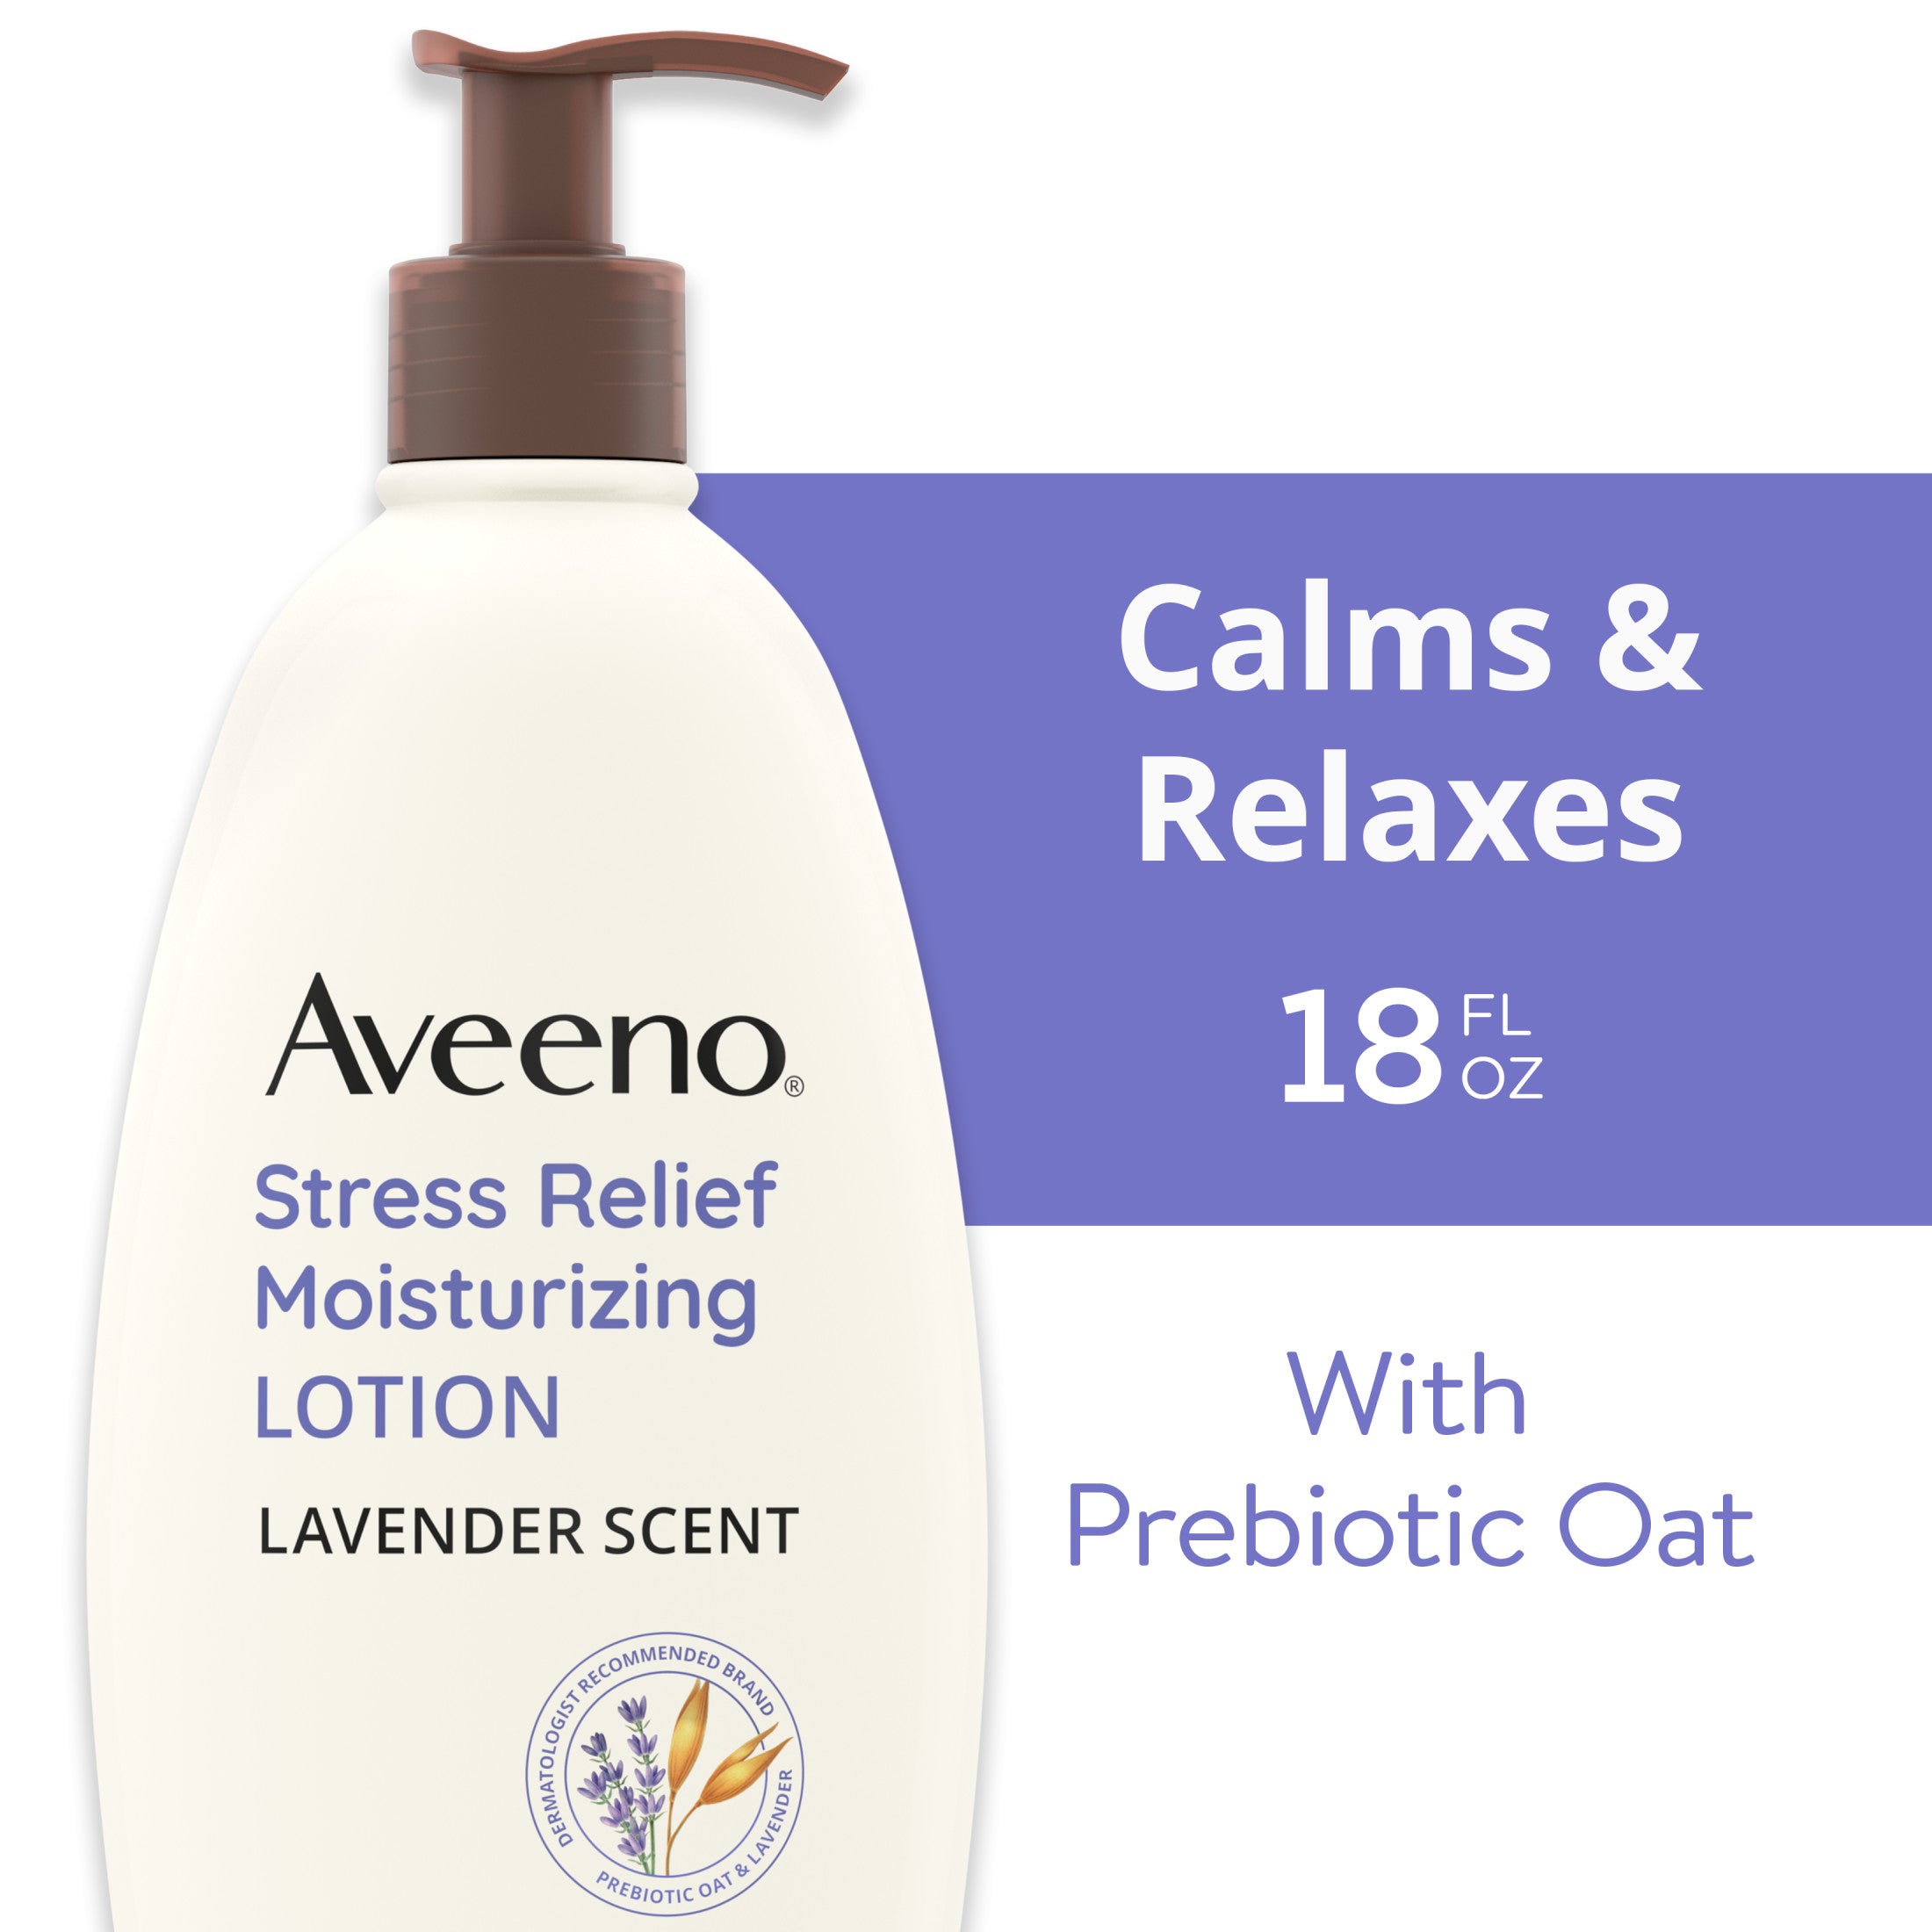 Aveeno Stress Relief Moisturizing Body and Hand Lotion with Prebiotic Oat, Lavender Scent, 18 oz | MTTS341